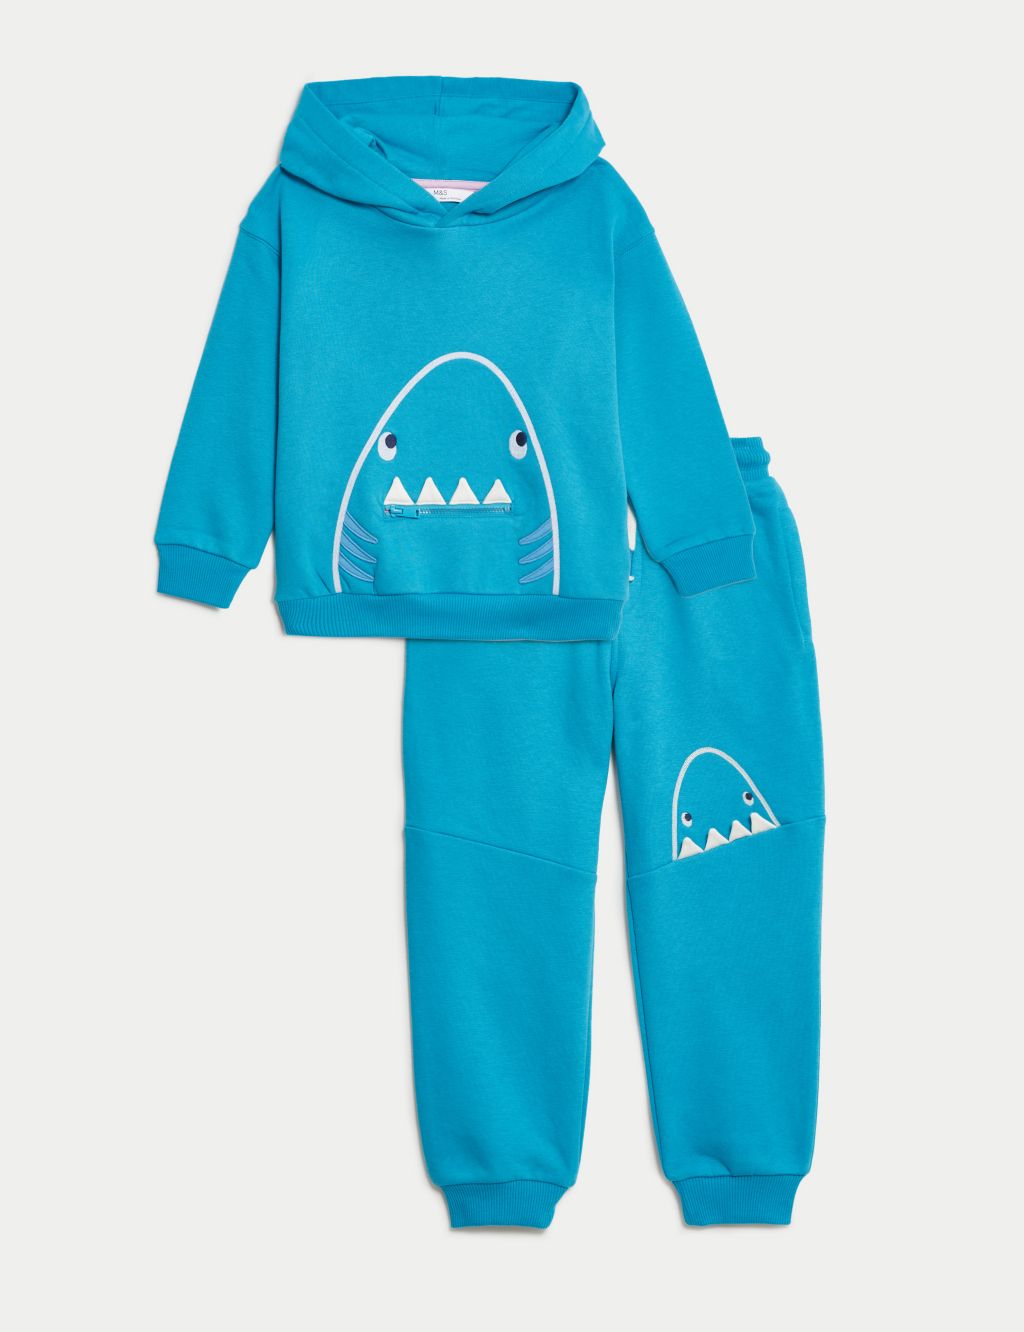 2pc Cotton Rich Shark Top & Bottom Outfit (2-8 Yrs) image 2